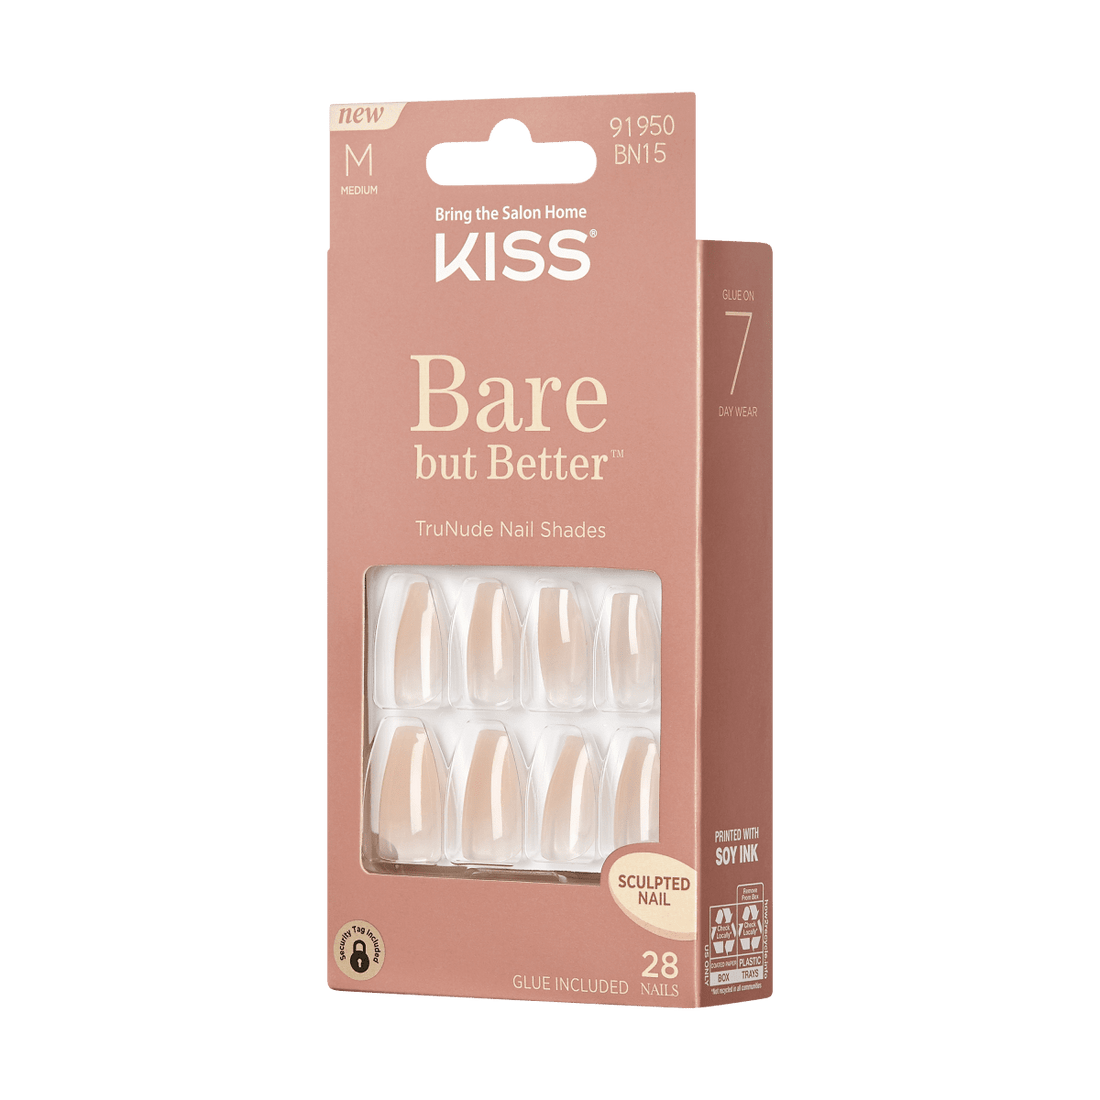 KISS Bare but Better, Press-On Nails, Embrace It, Beige, Med Coffin, 28ct